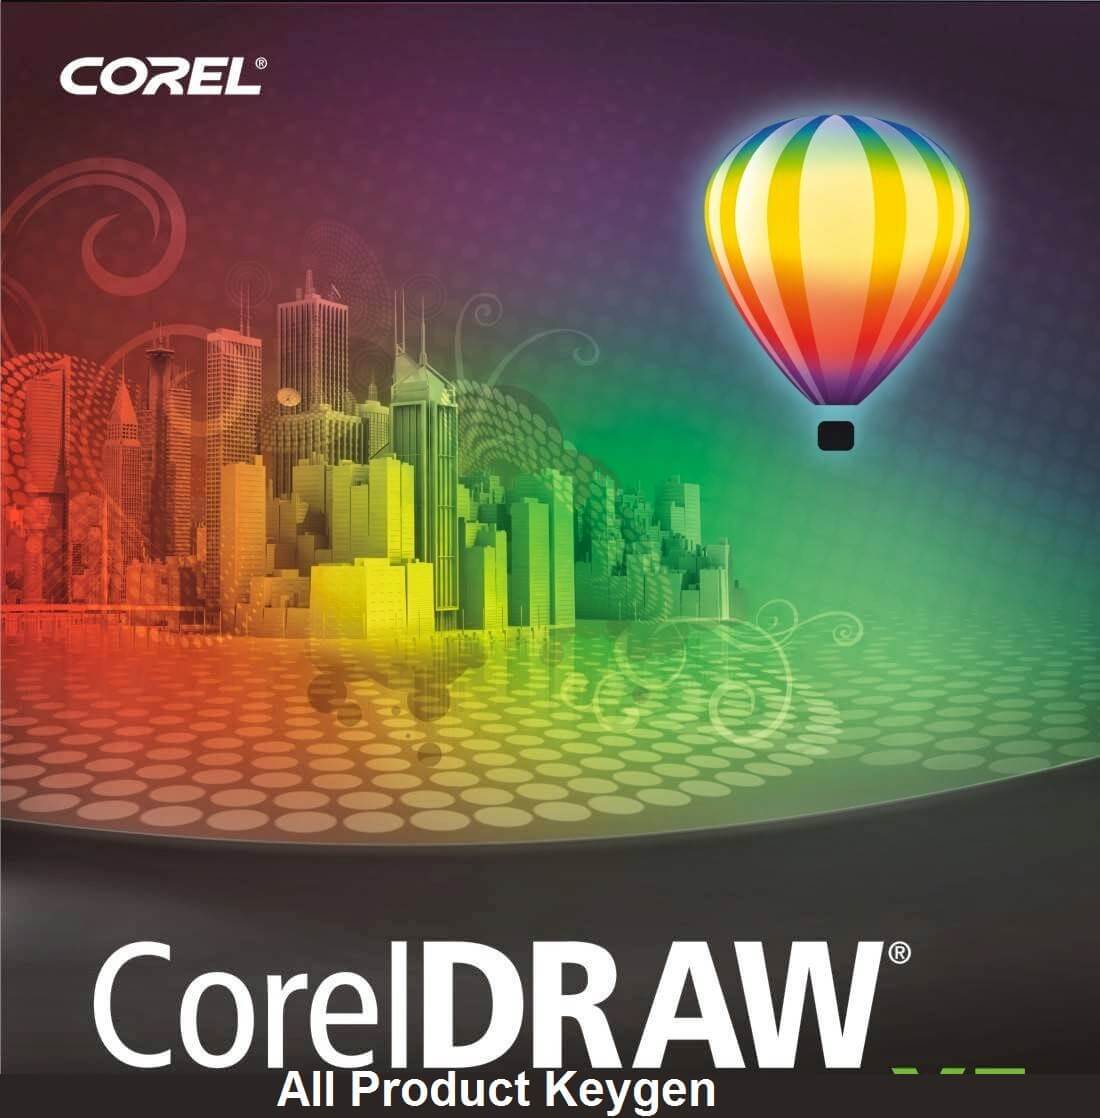 coreldraw 2015 free download full version with crack